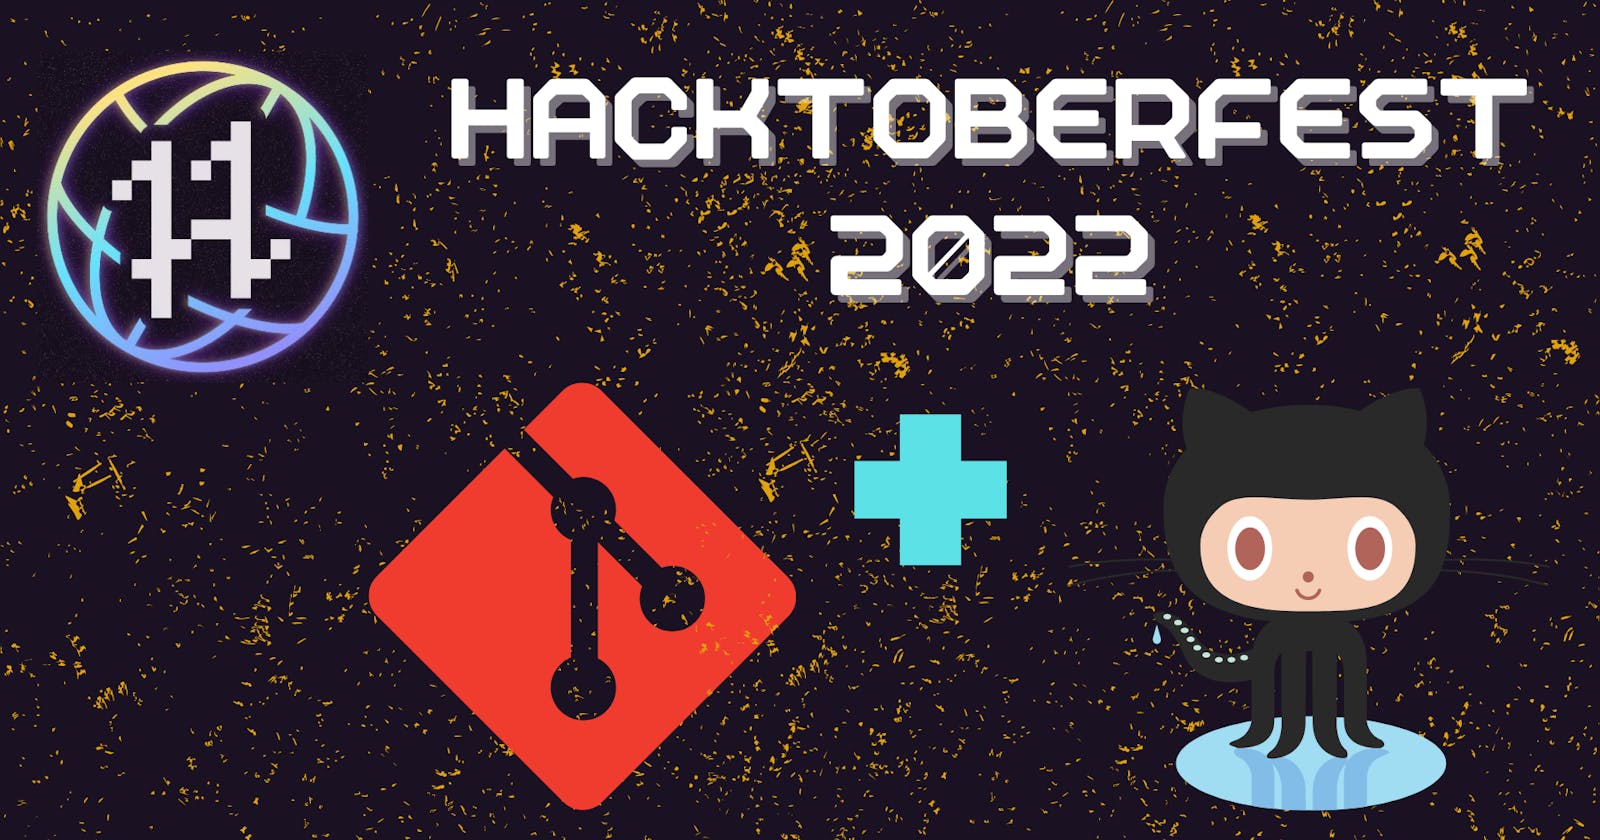 Basic GIT Commands you Need for Hacktoberfest 2022